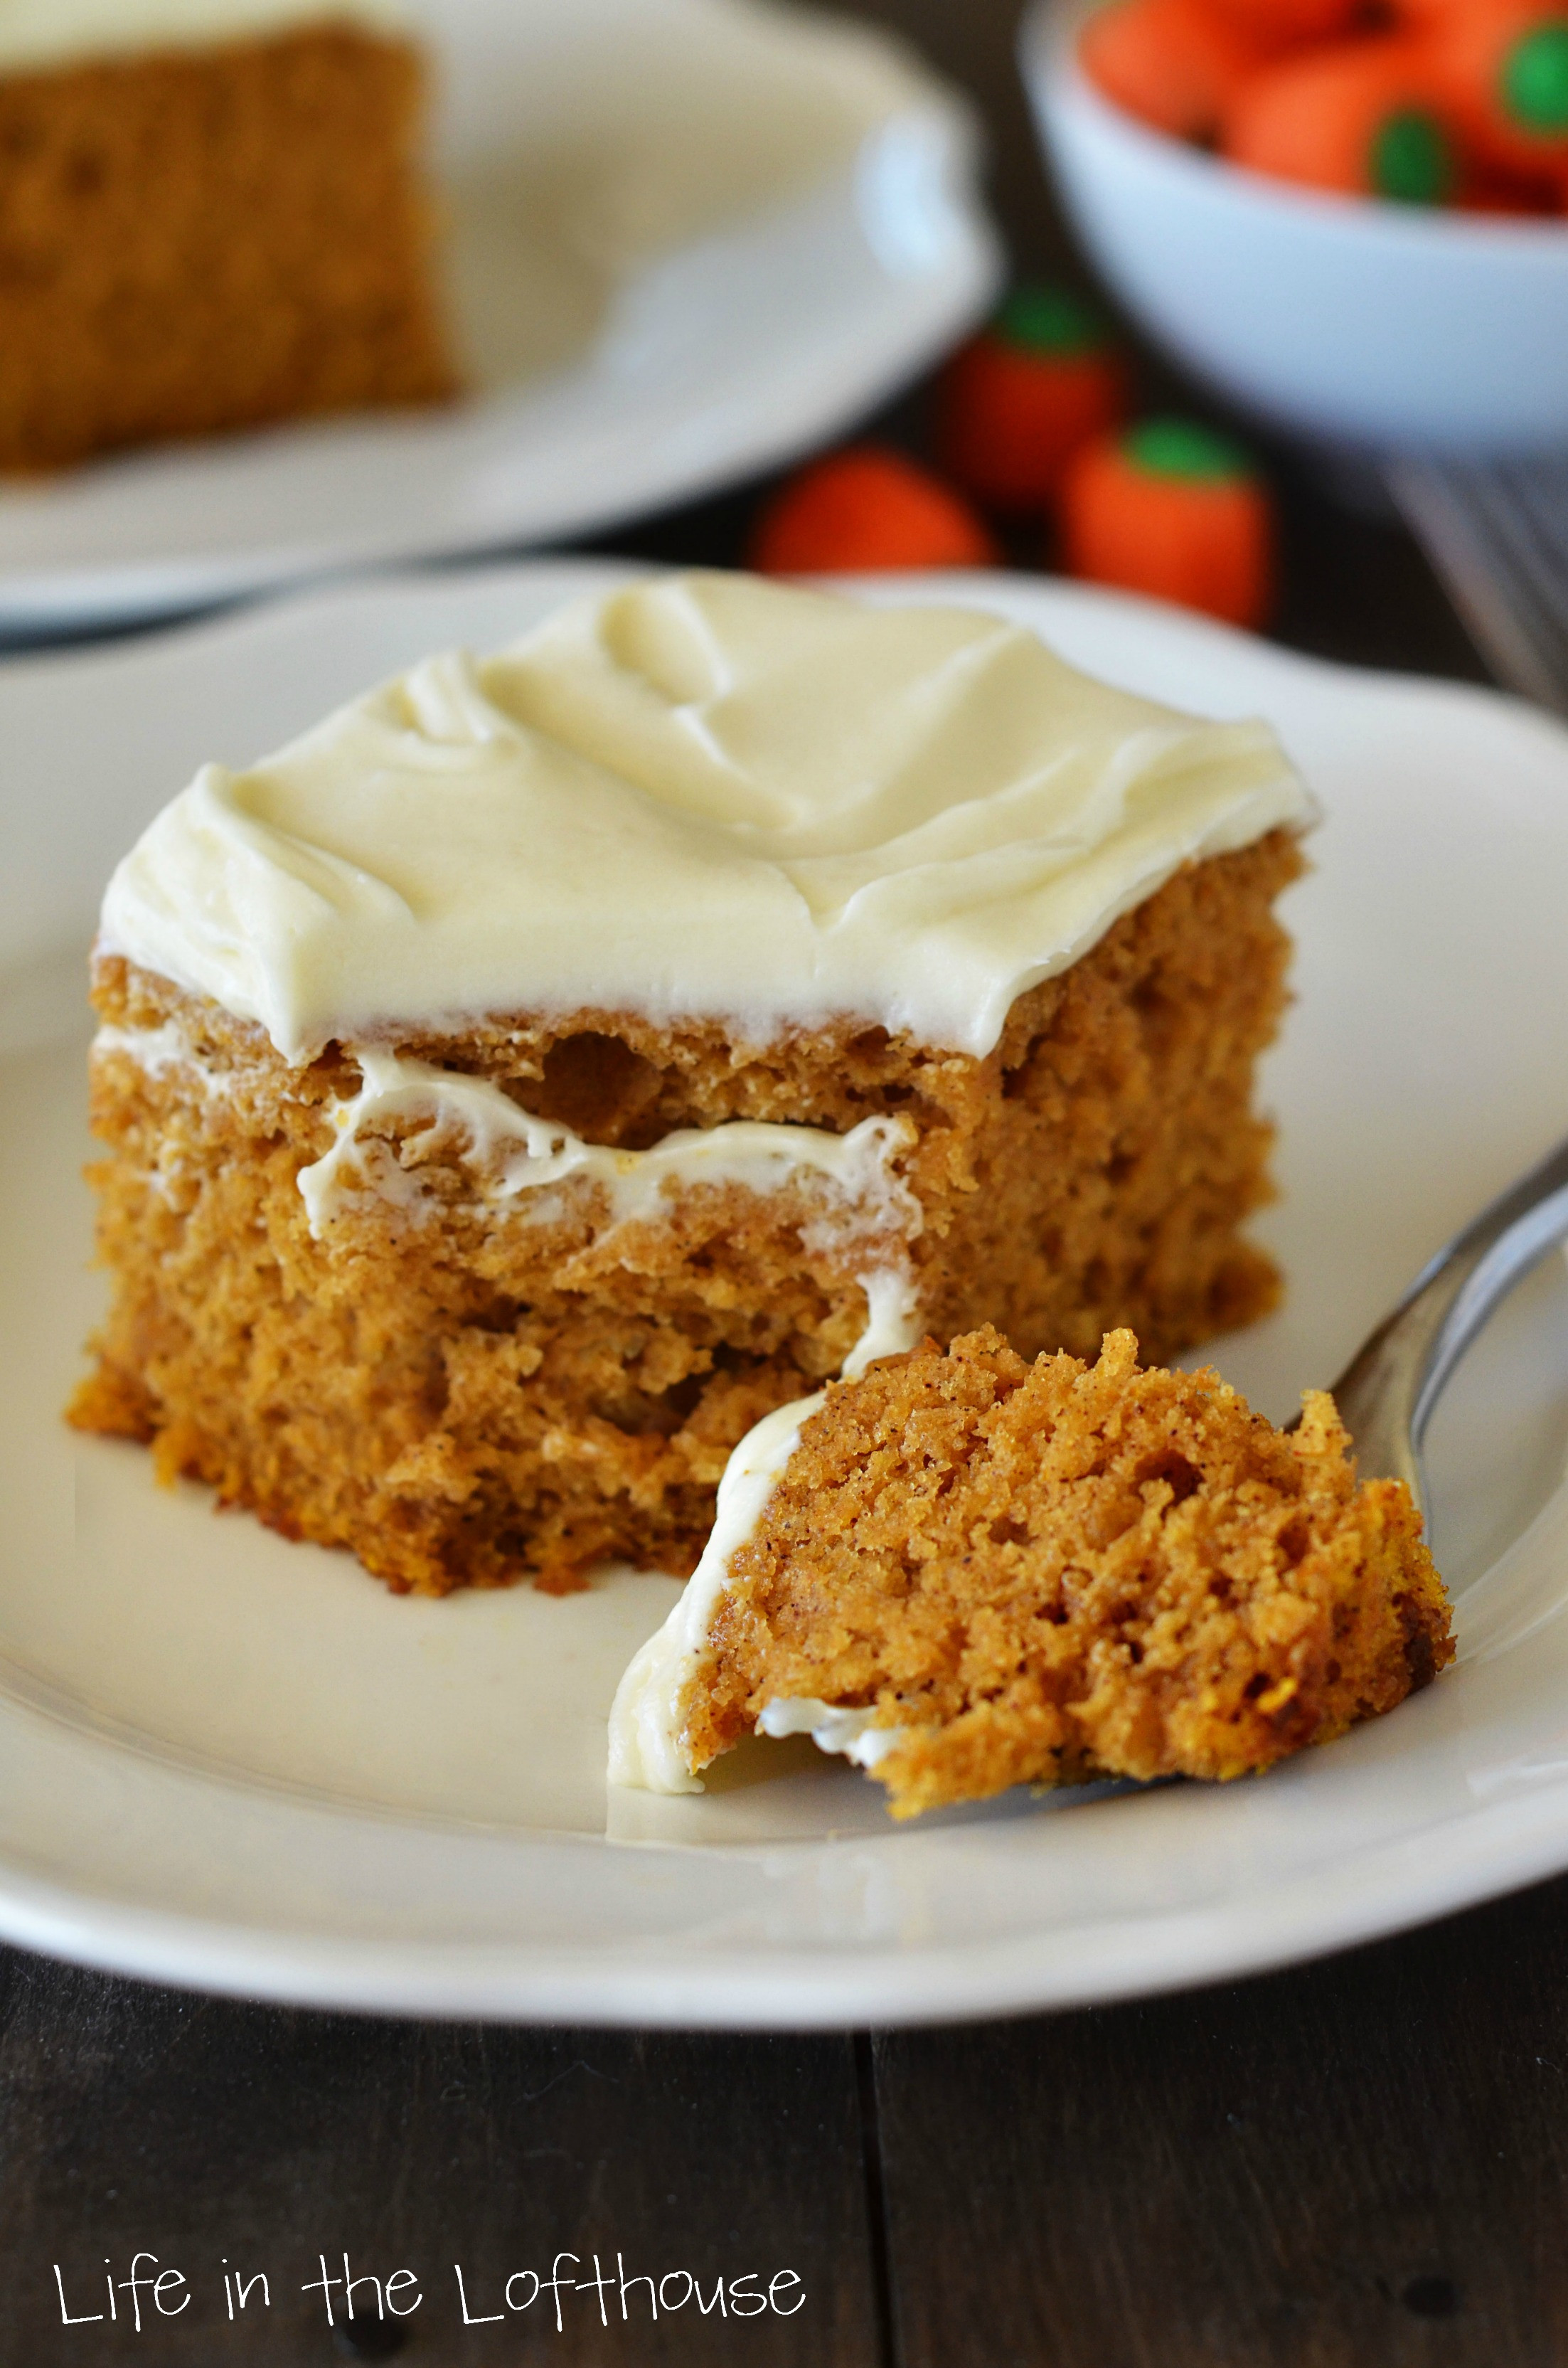 Pumpkin Cake With Cream Cheese Frosting
 Pumpkin Cake with Cream Cheese Frosting